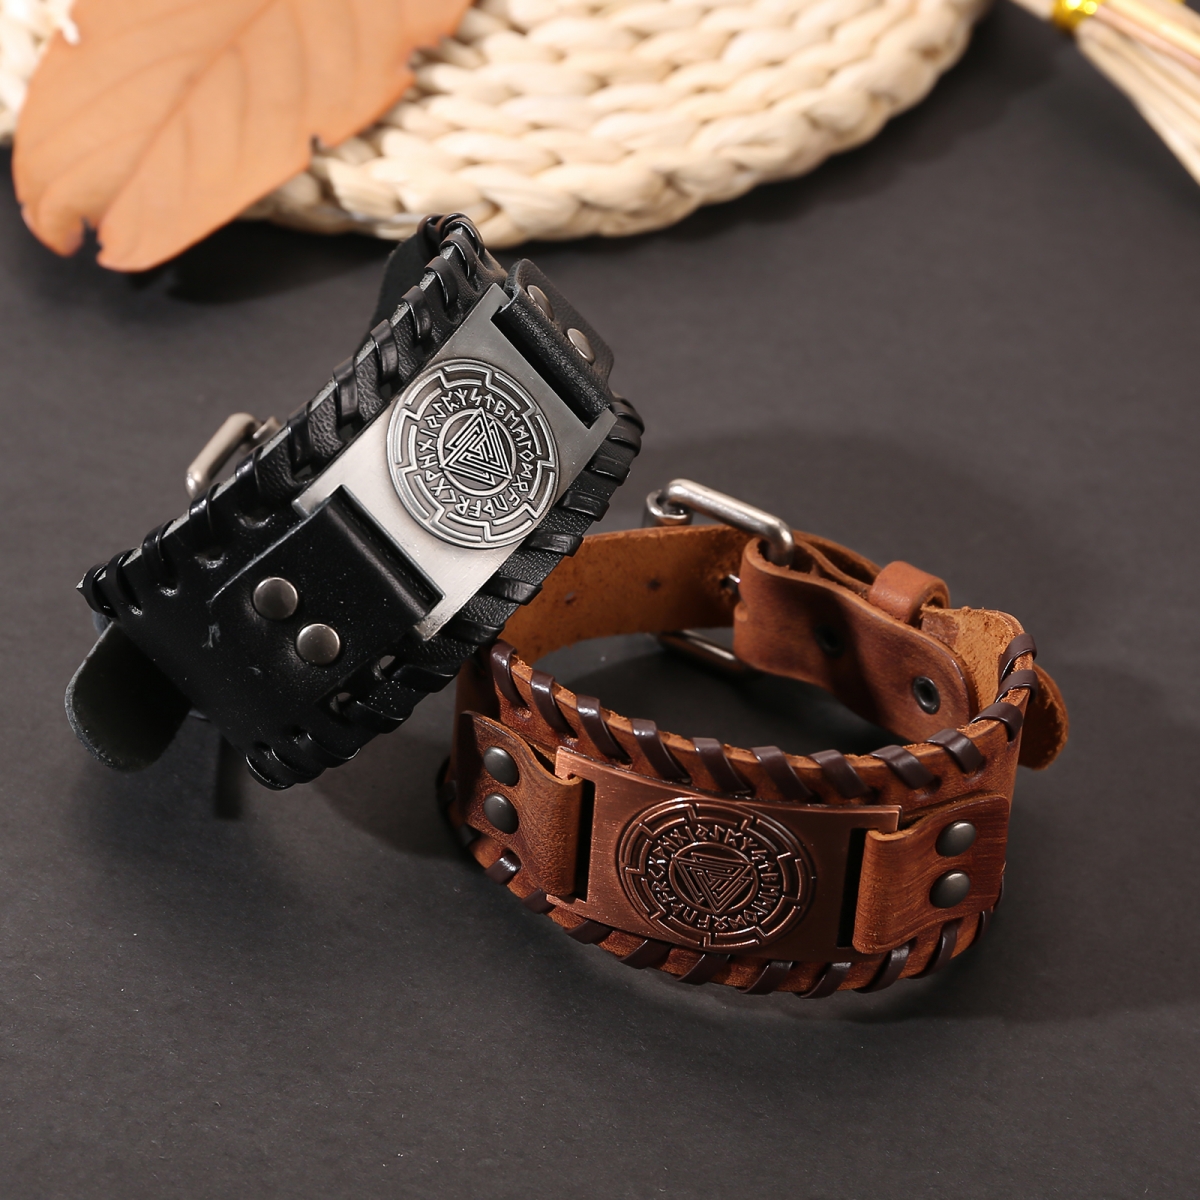 Latest viking bracelet genuine leather with good price-NORSECOLLECTION- Viking Jewelry,Viking Necklace,Viking Bracelet,Viking Rings,Viking Mugs,Viking Accessories,Viking Crafts